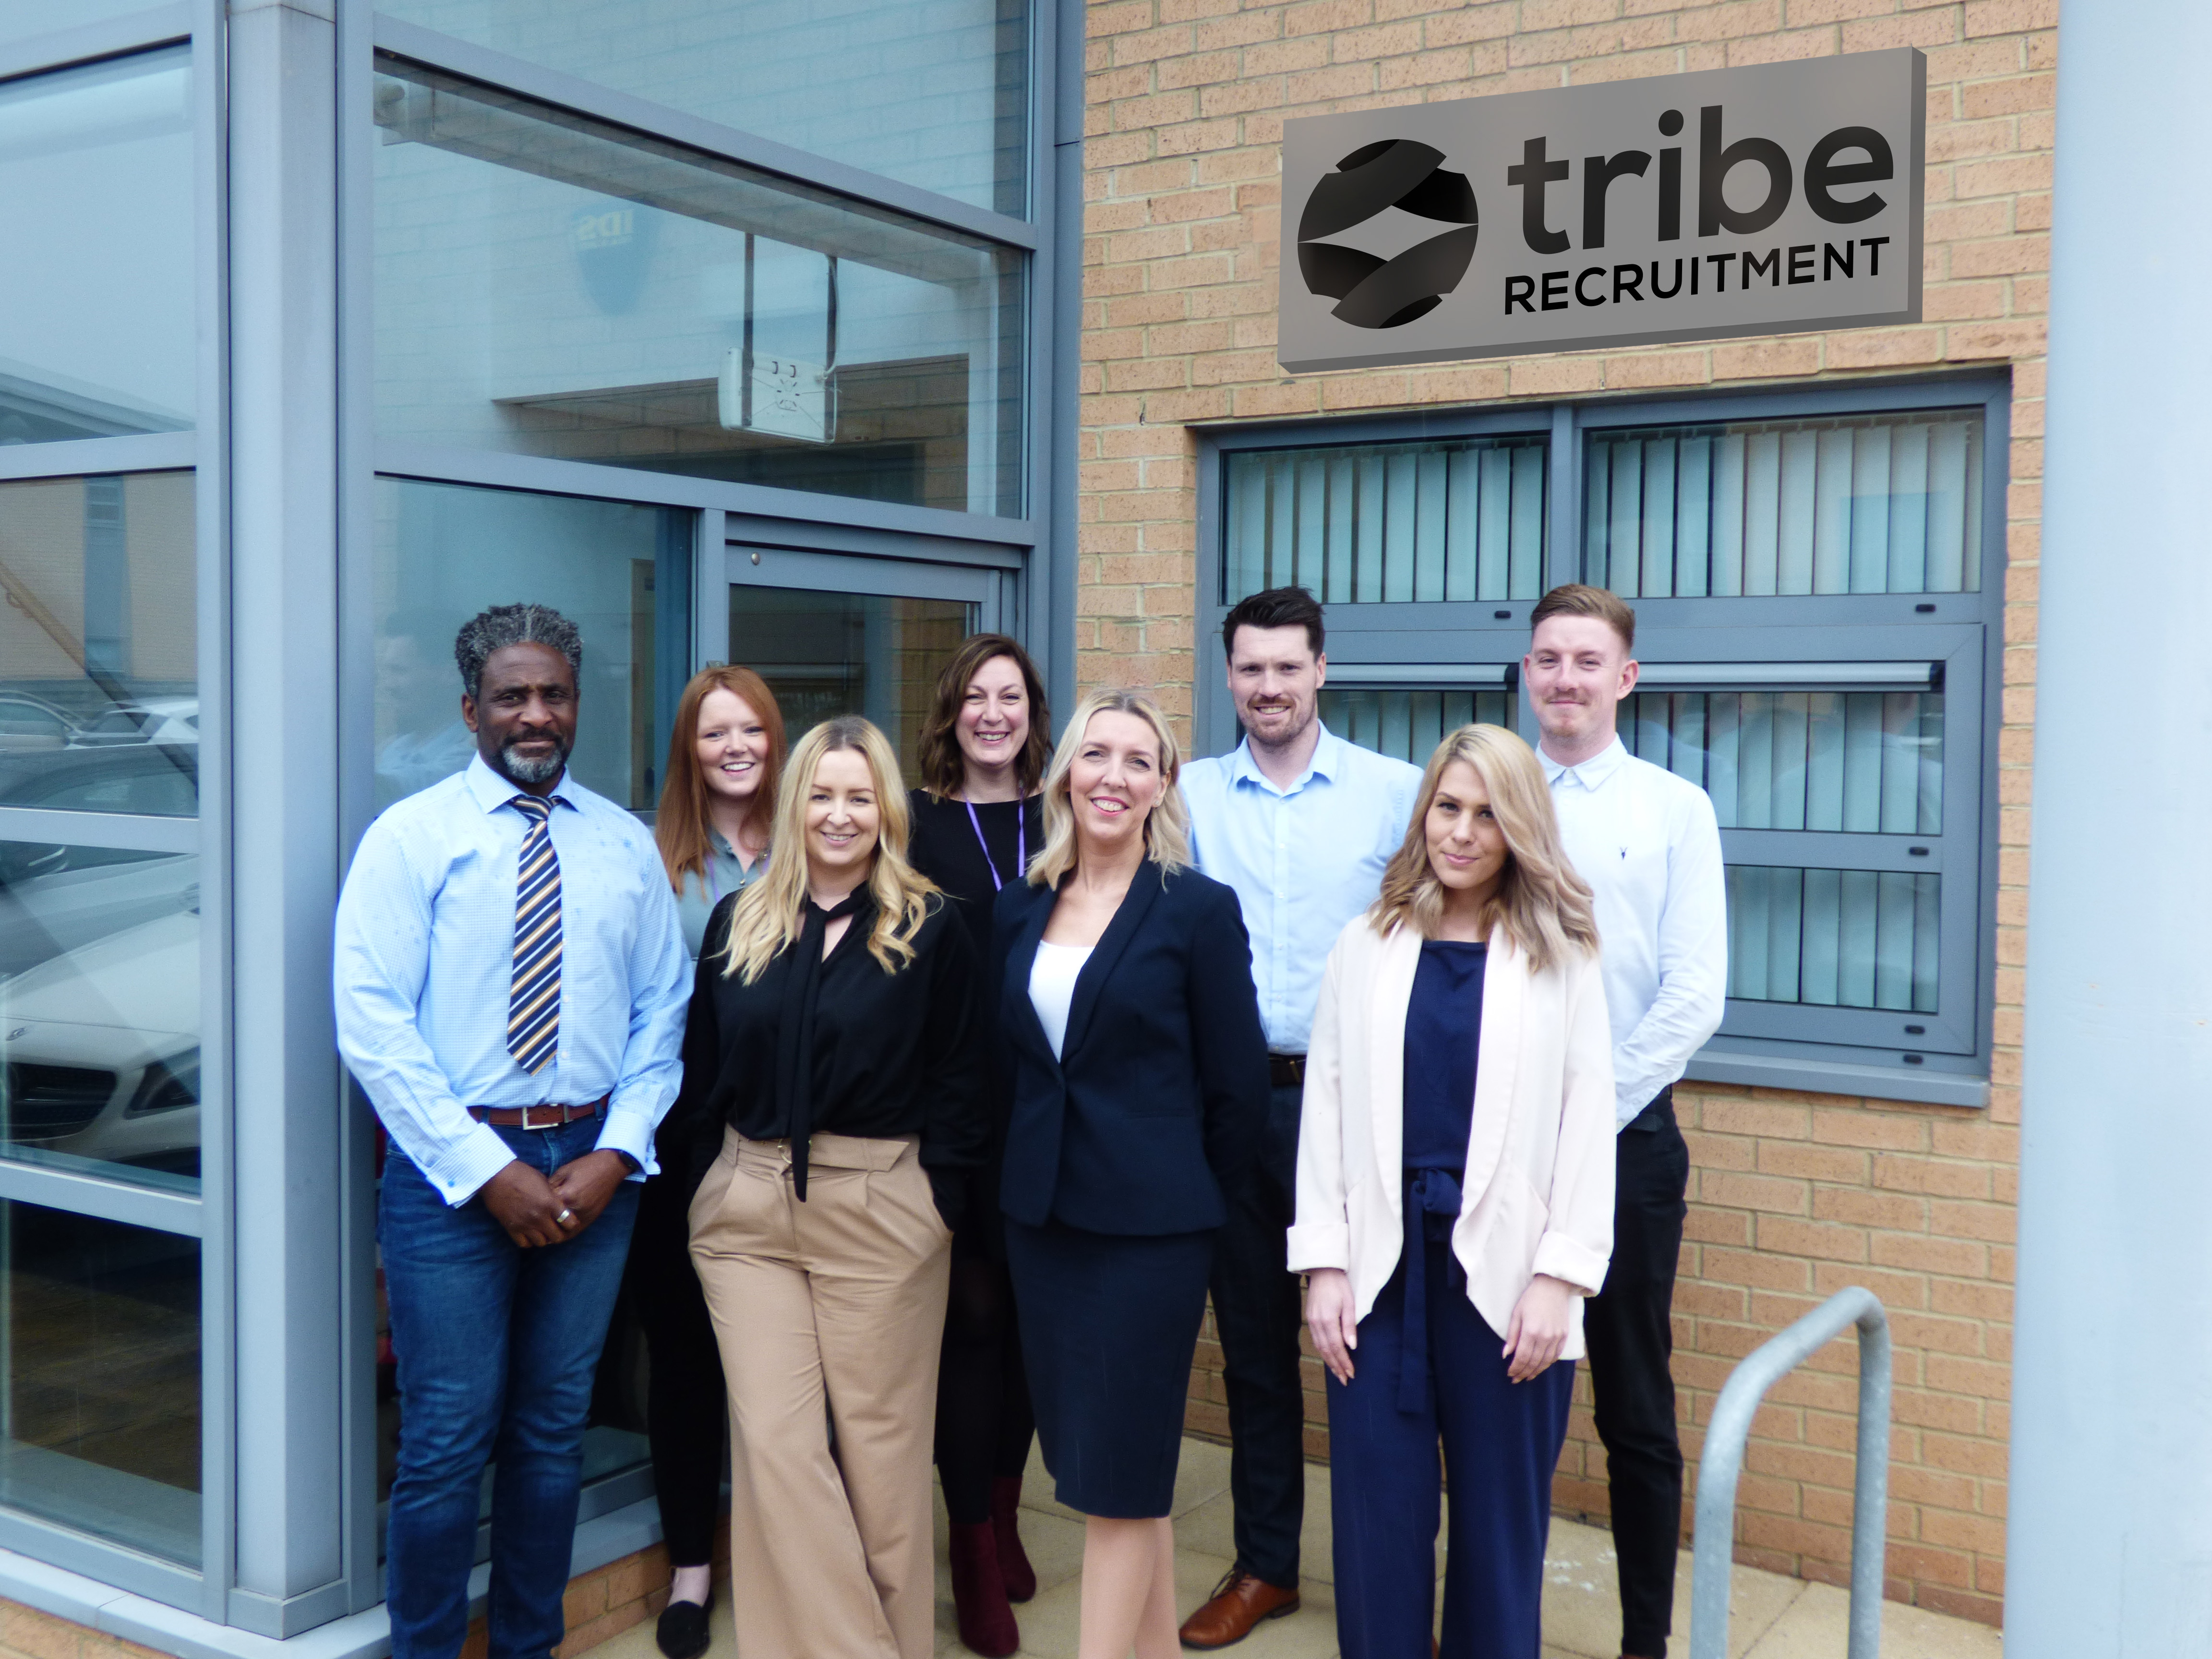 Specialist recruitment firm continues to invest in the region with new office expansion and job creation.